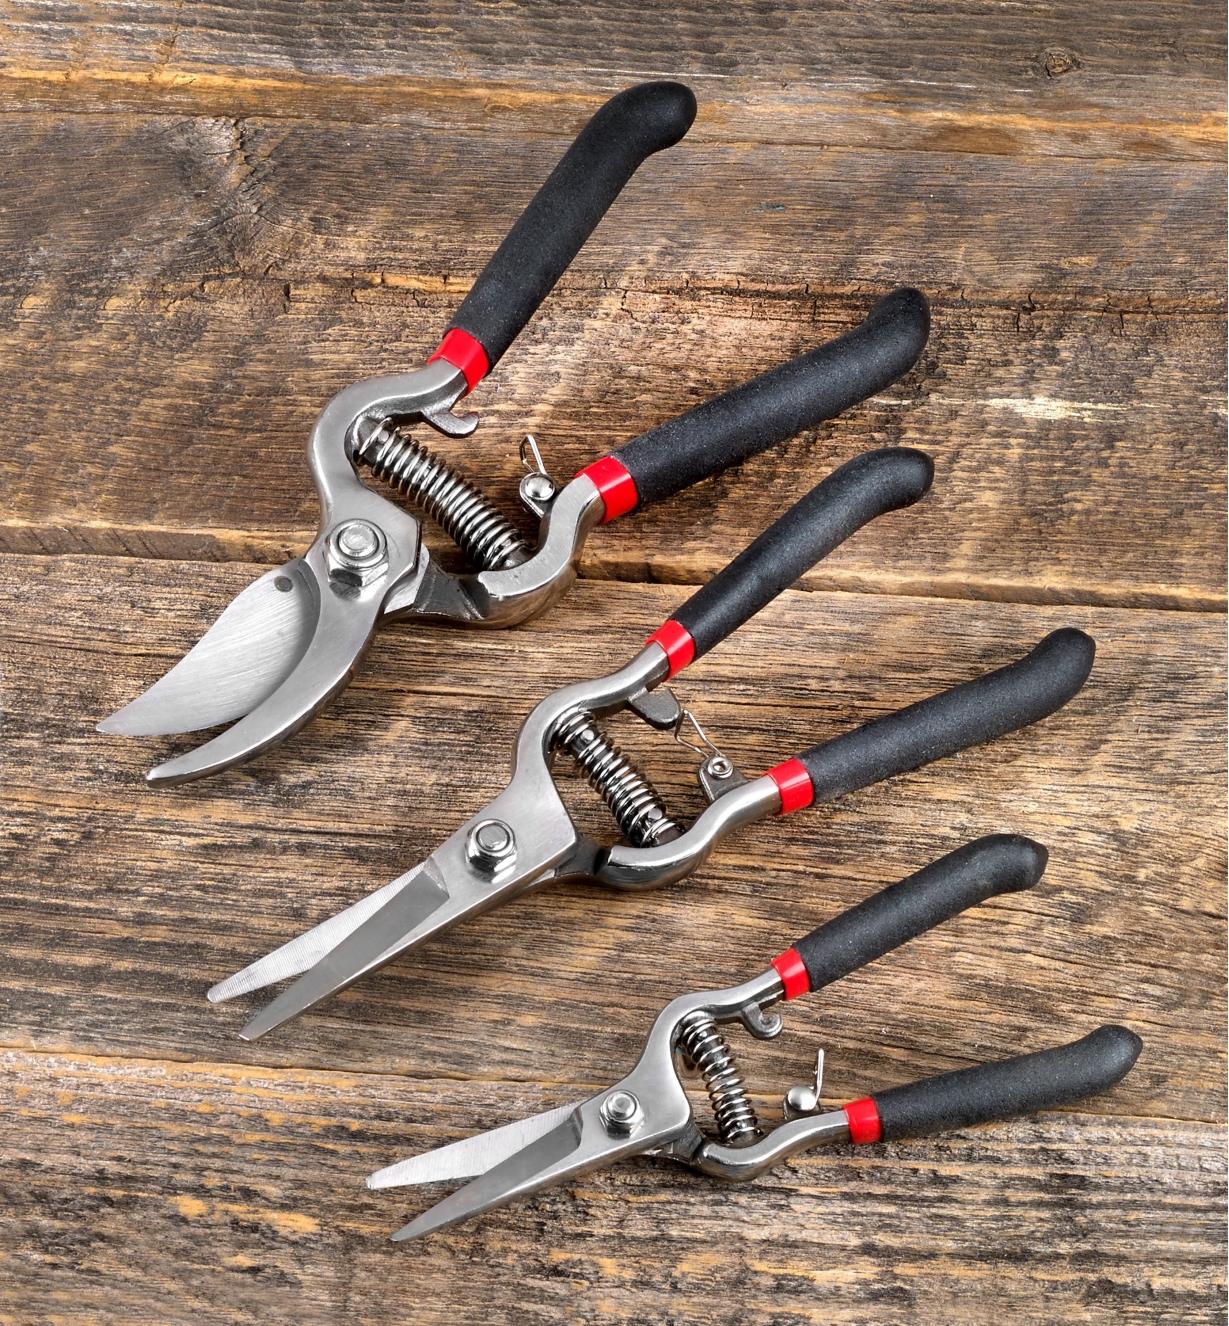 AB553 - Stainless-Steel Pruning Tools, set of 3